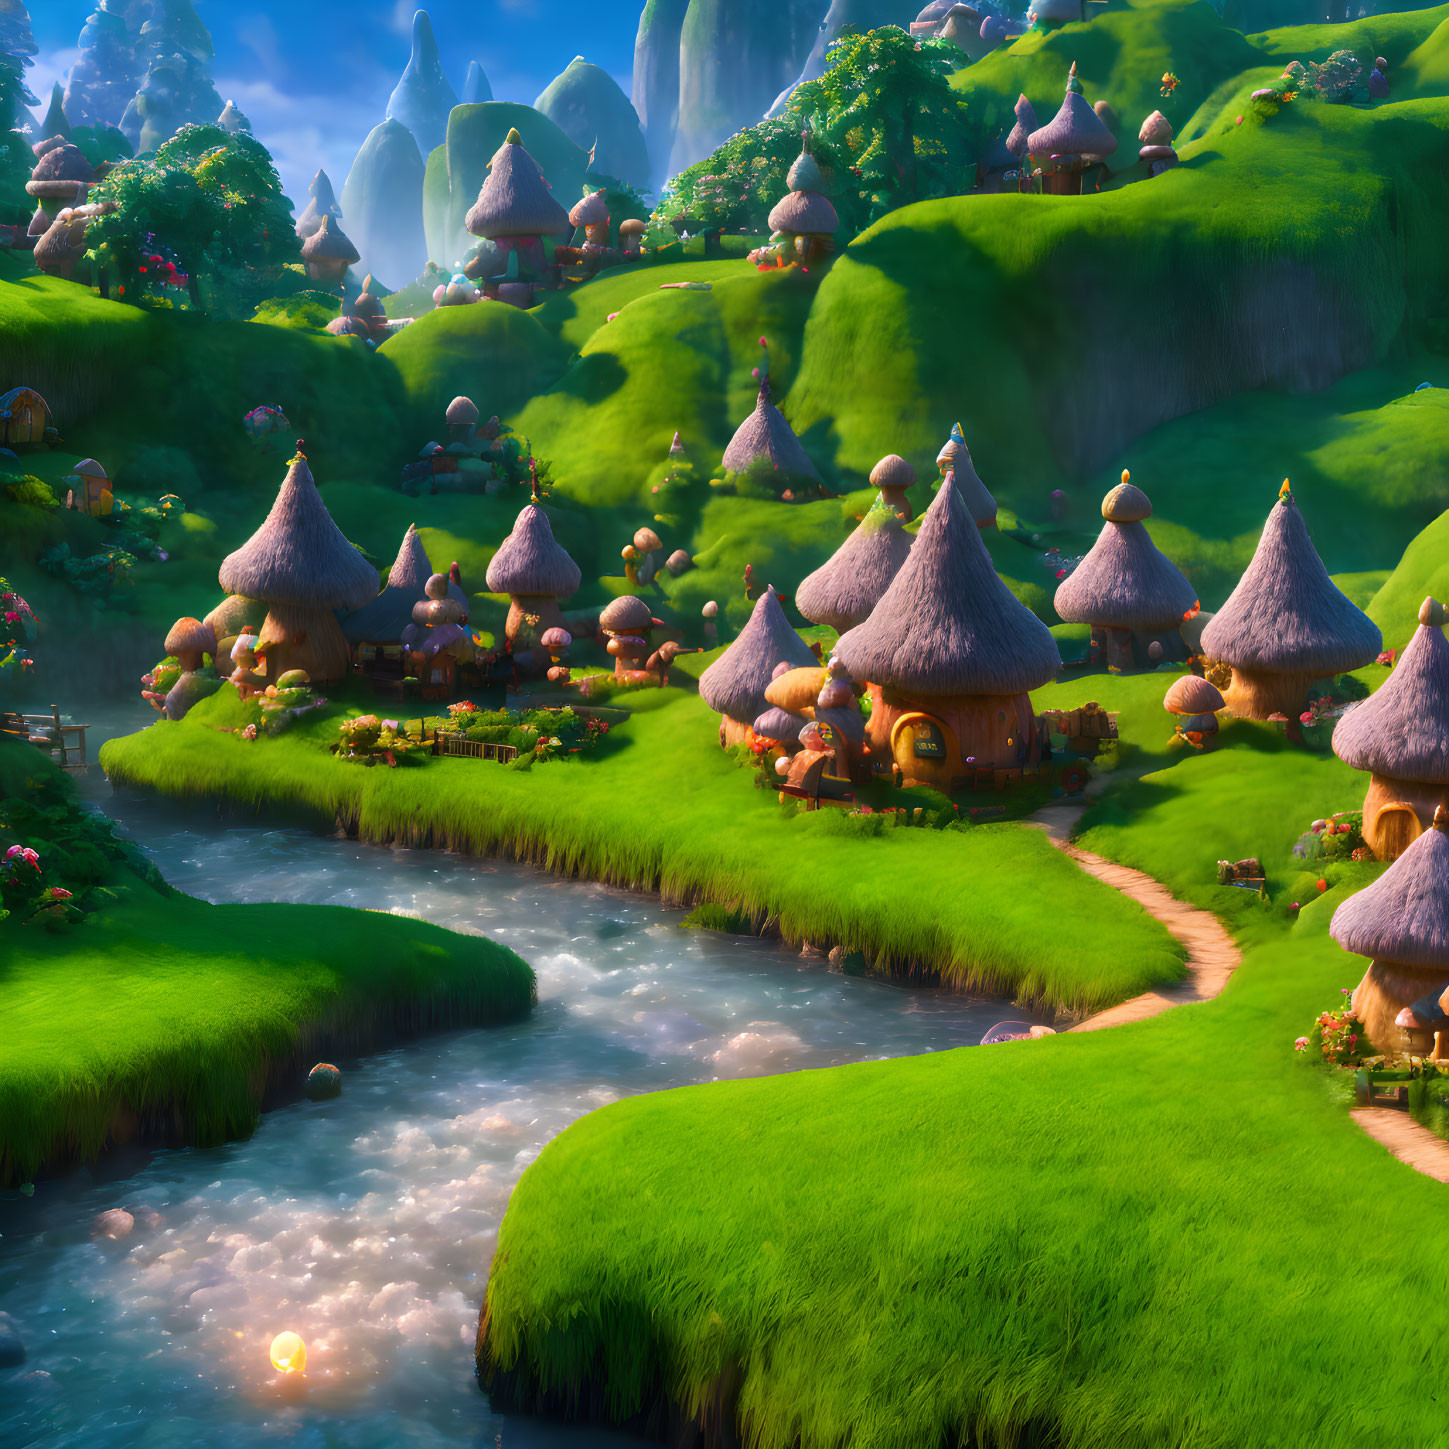 Fantasy landscape with thatched-roof cottages, green hills, streams, and glowing orbs.